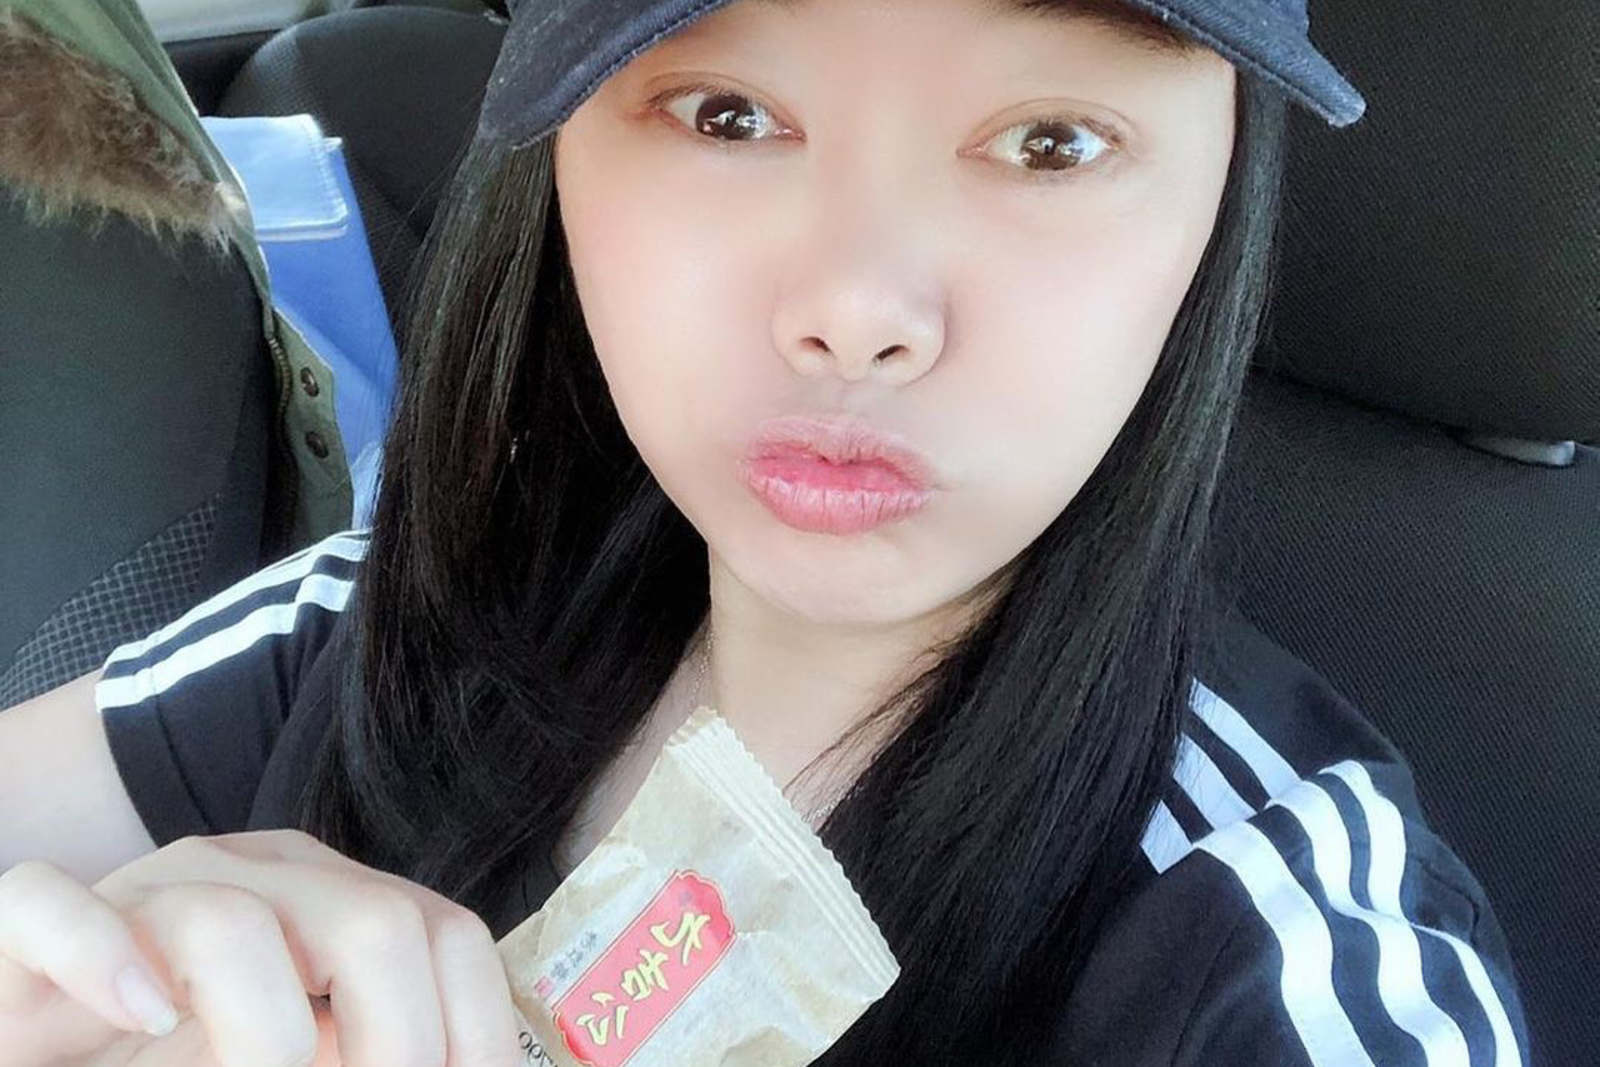 Connie Chong advertised the tea that she imported from Malaysia on social media.